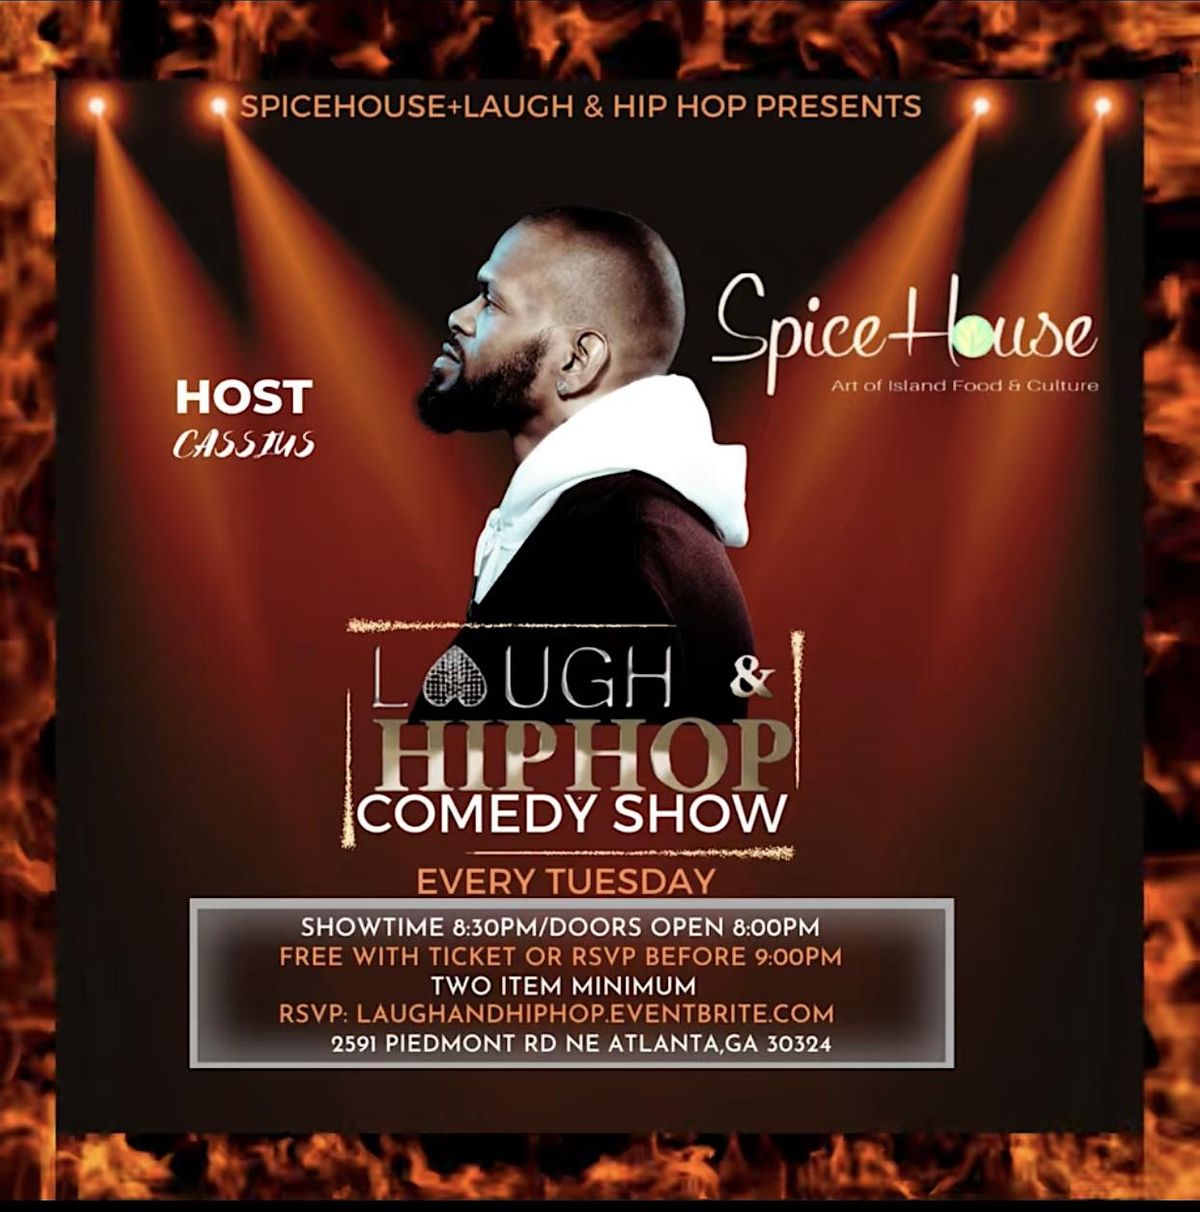 THE LAUGH & HIP HOP COMEDY SHOW @ THE SPICEHOUSE